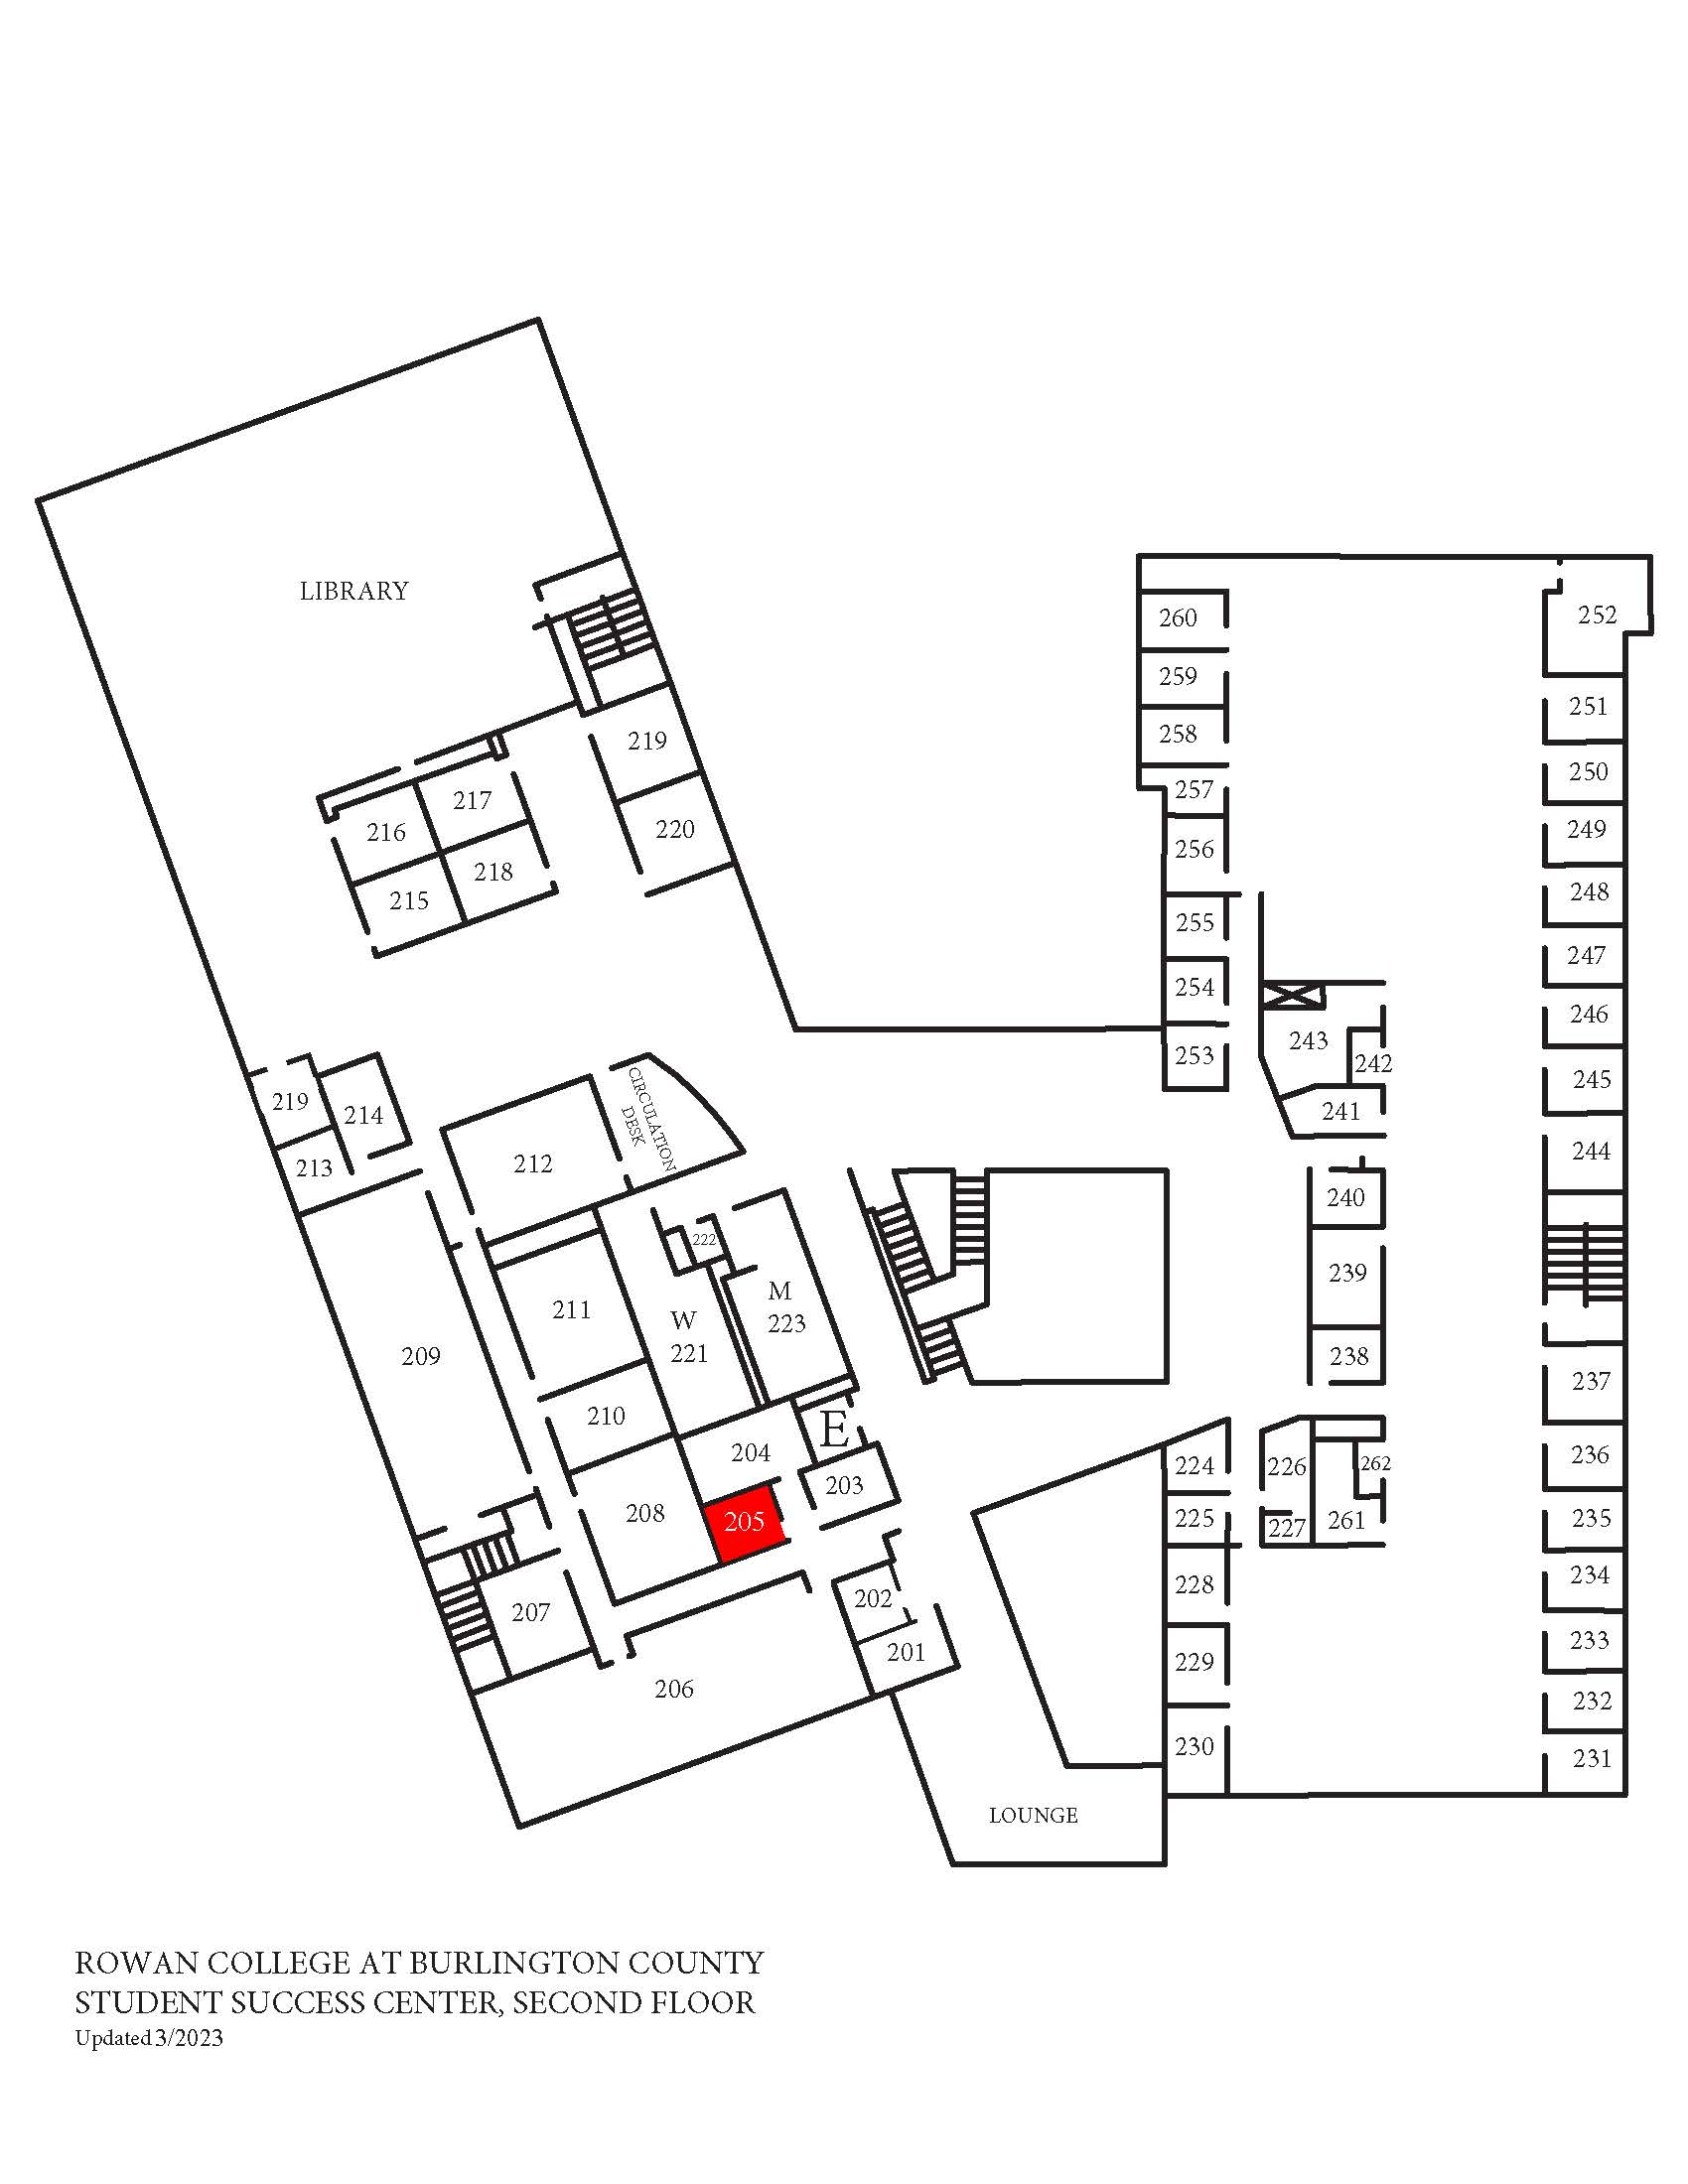 Floor plans of the Student Success Center locating Lactation Room (205)